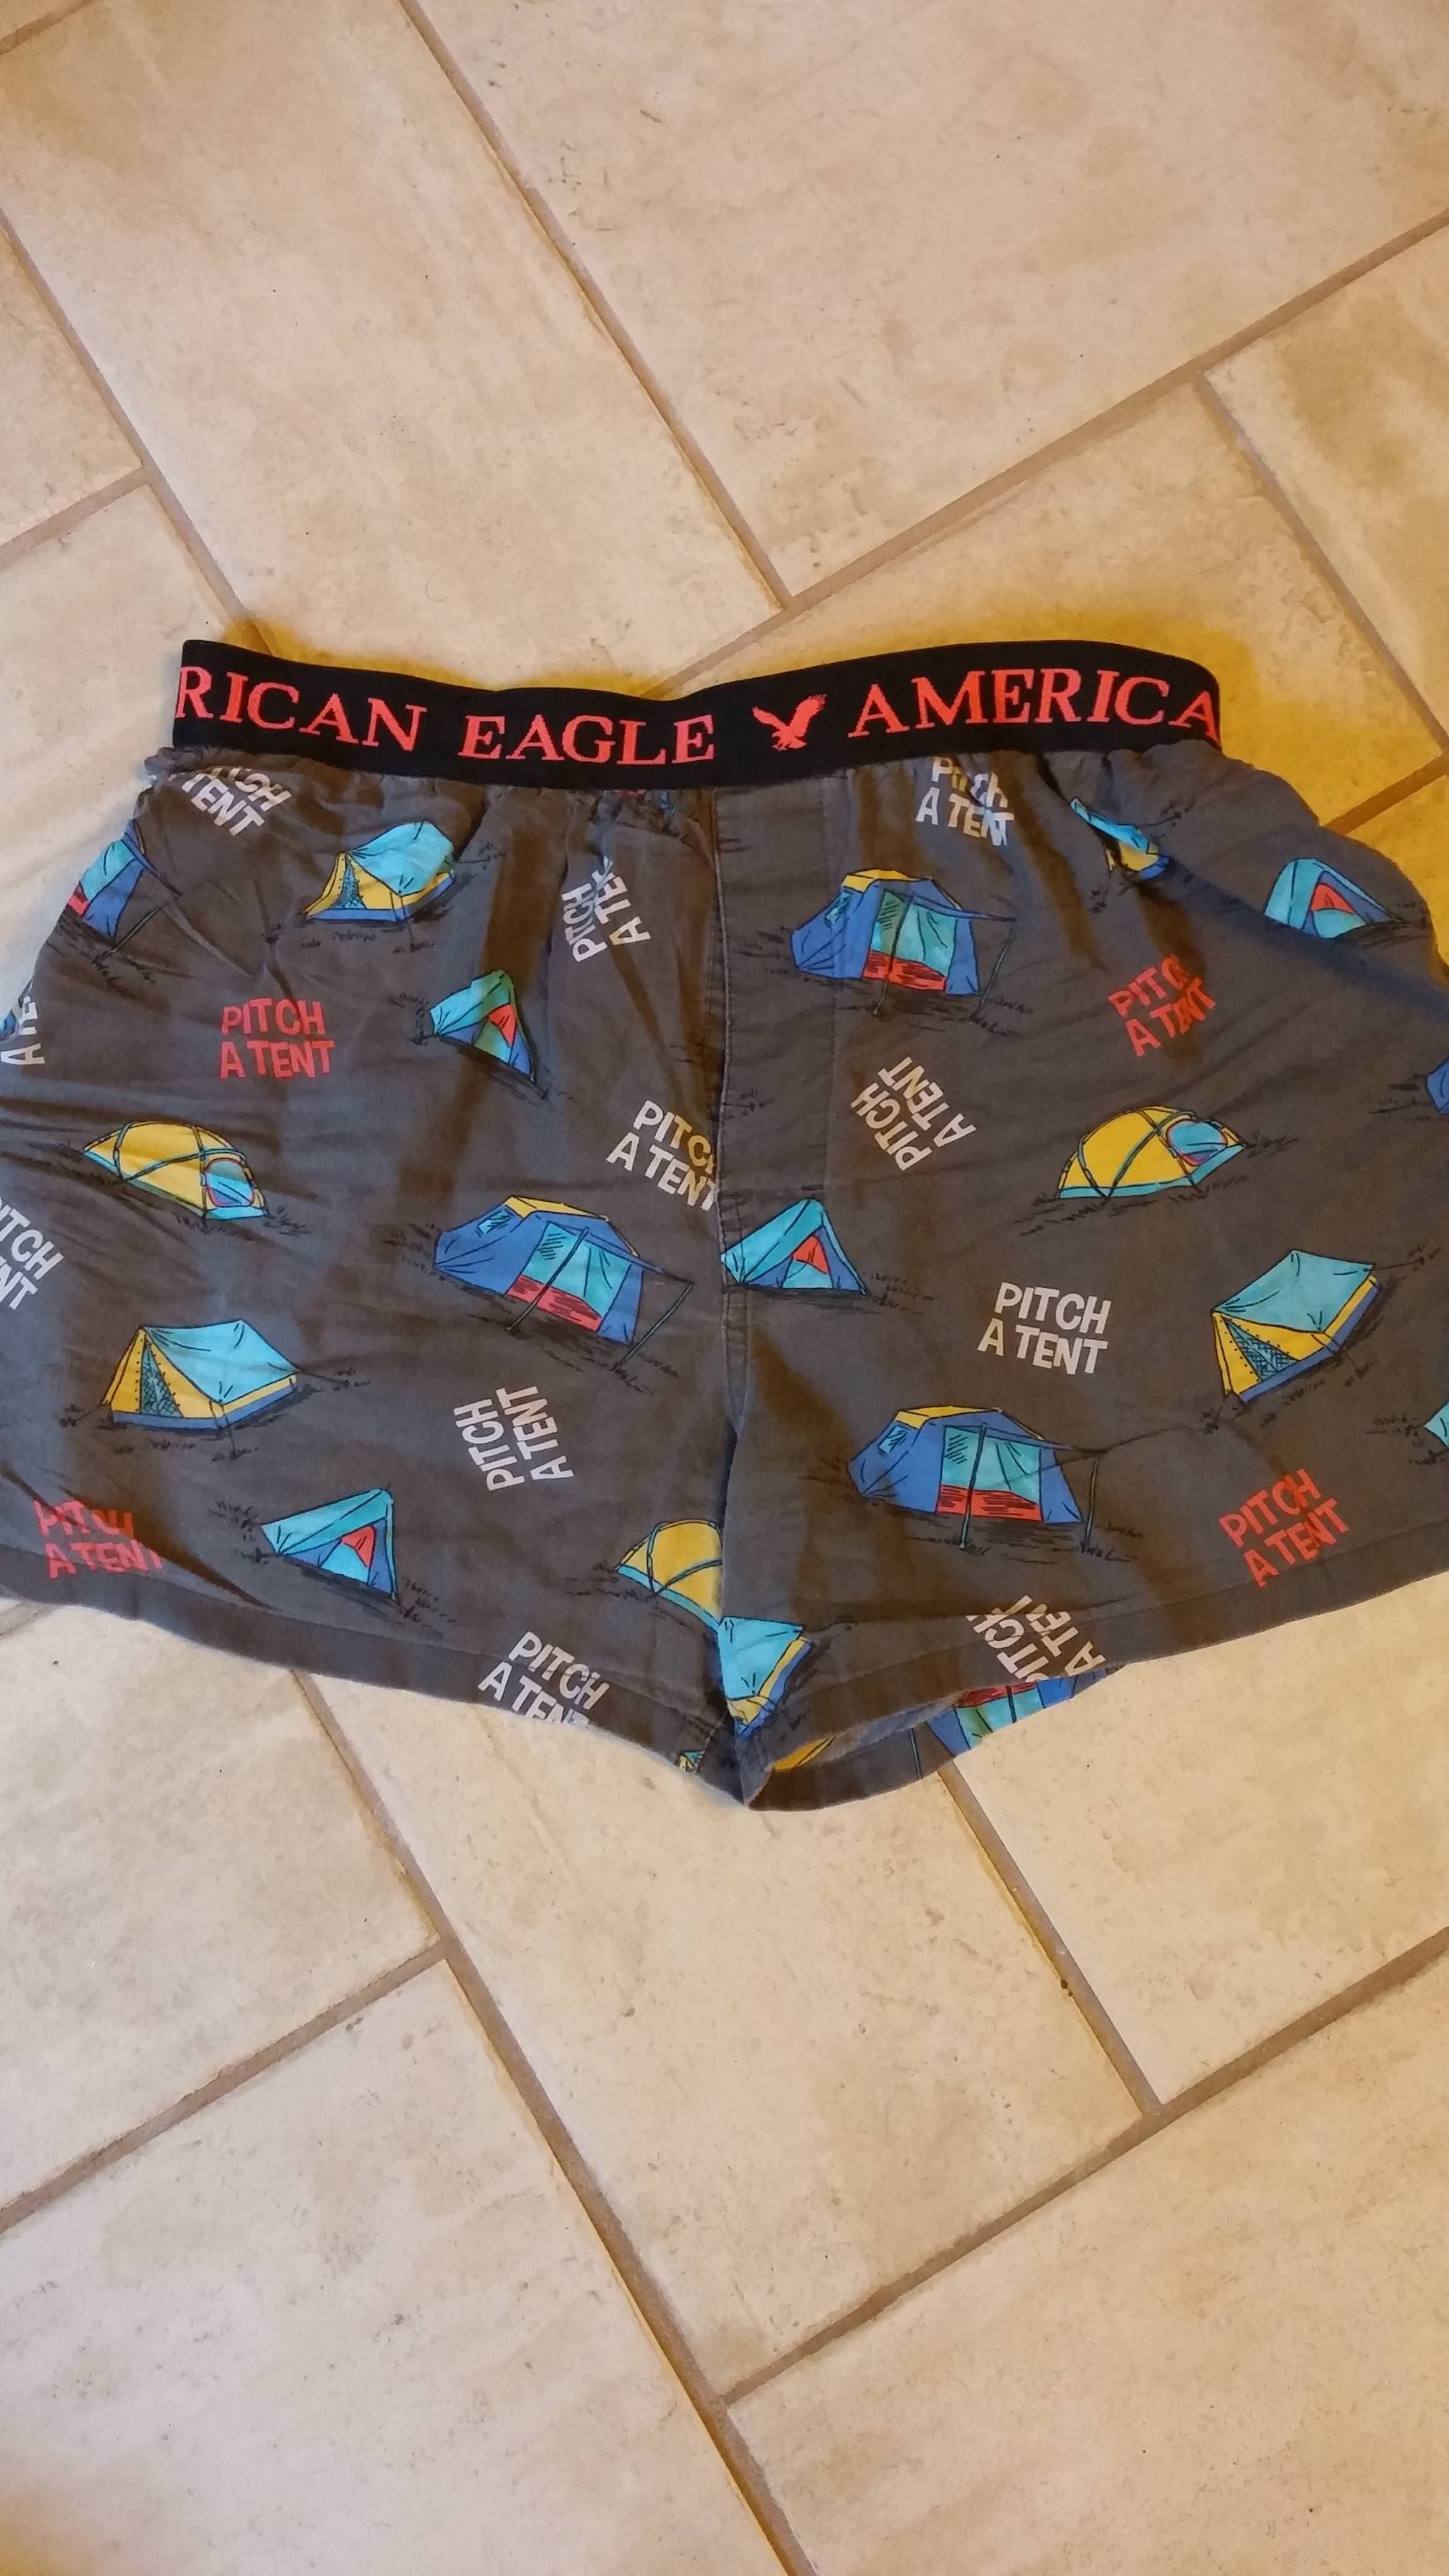 My French mom got me these boxers because she said she knows I love camping.